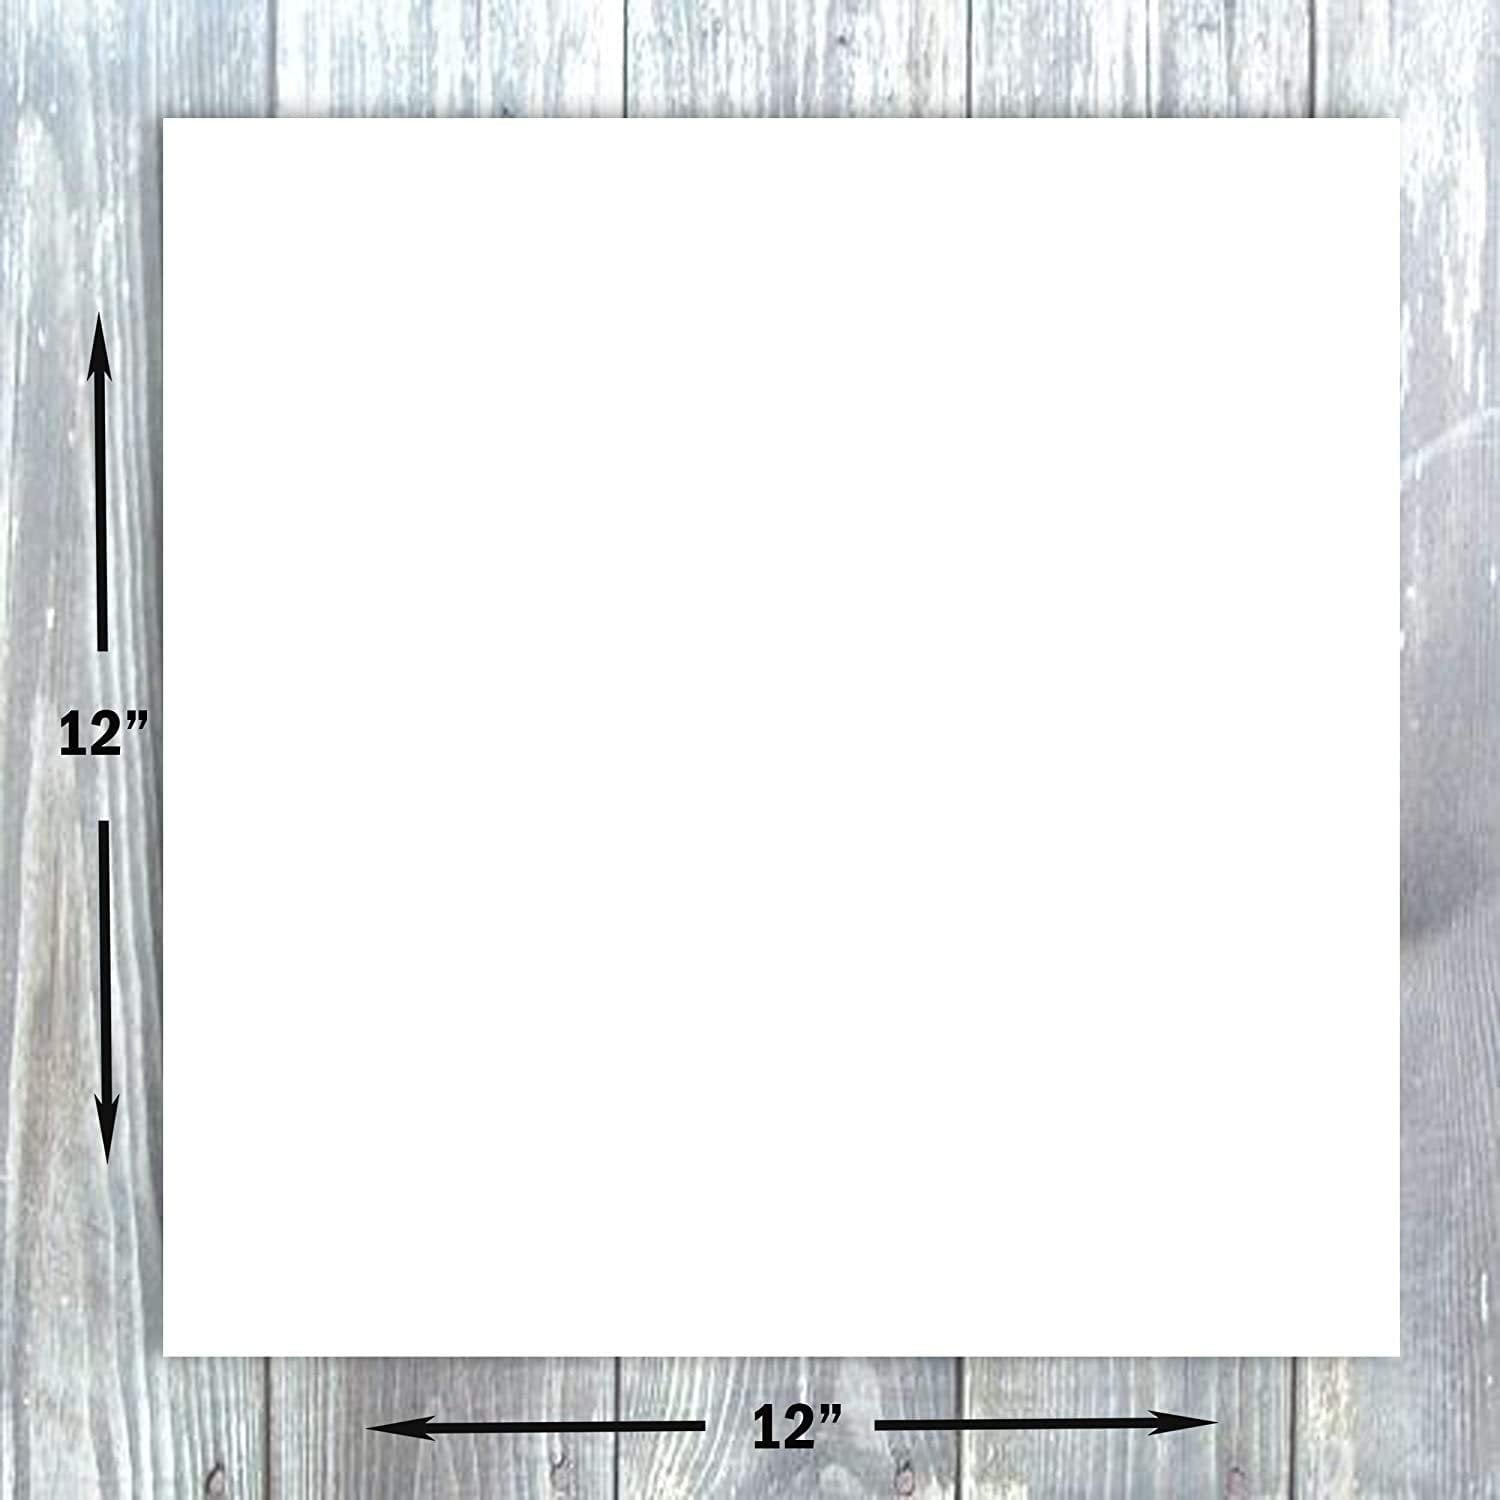 Card Stock 12x12” paper25 Sheets Premium Quality Lightfast Archival  Scrapbooking